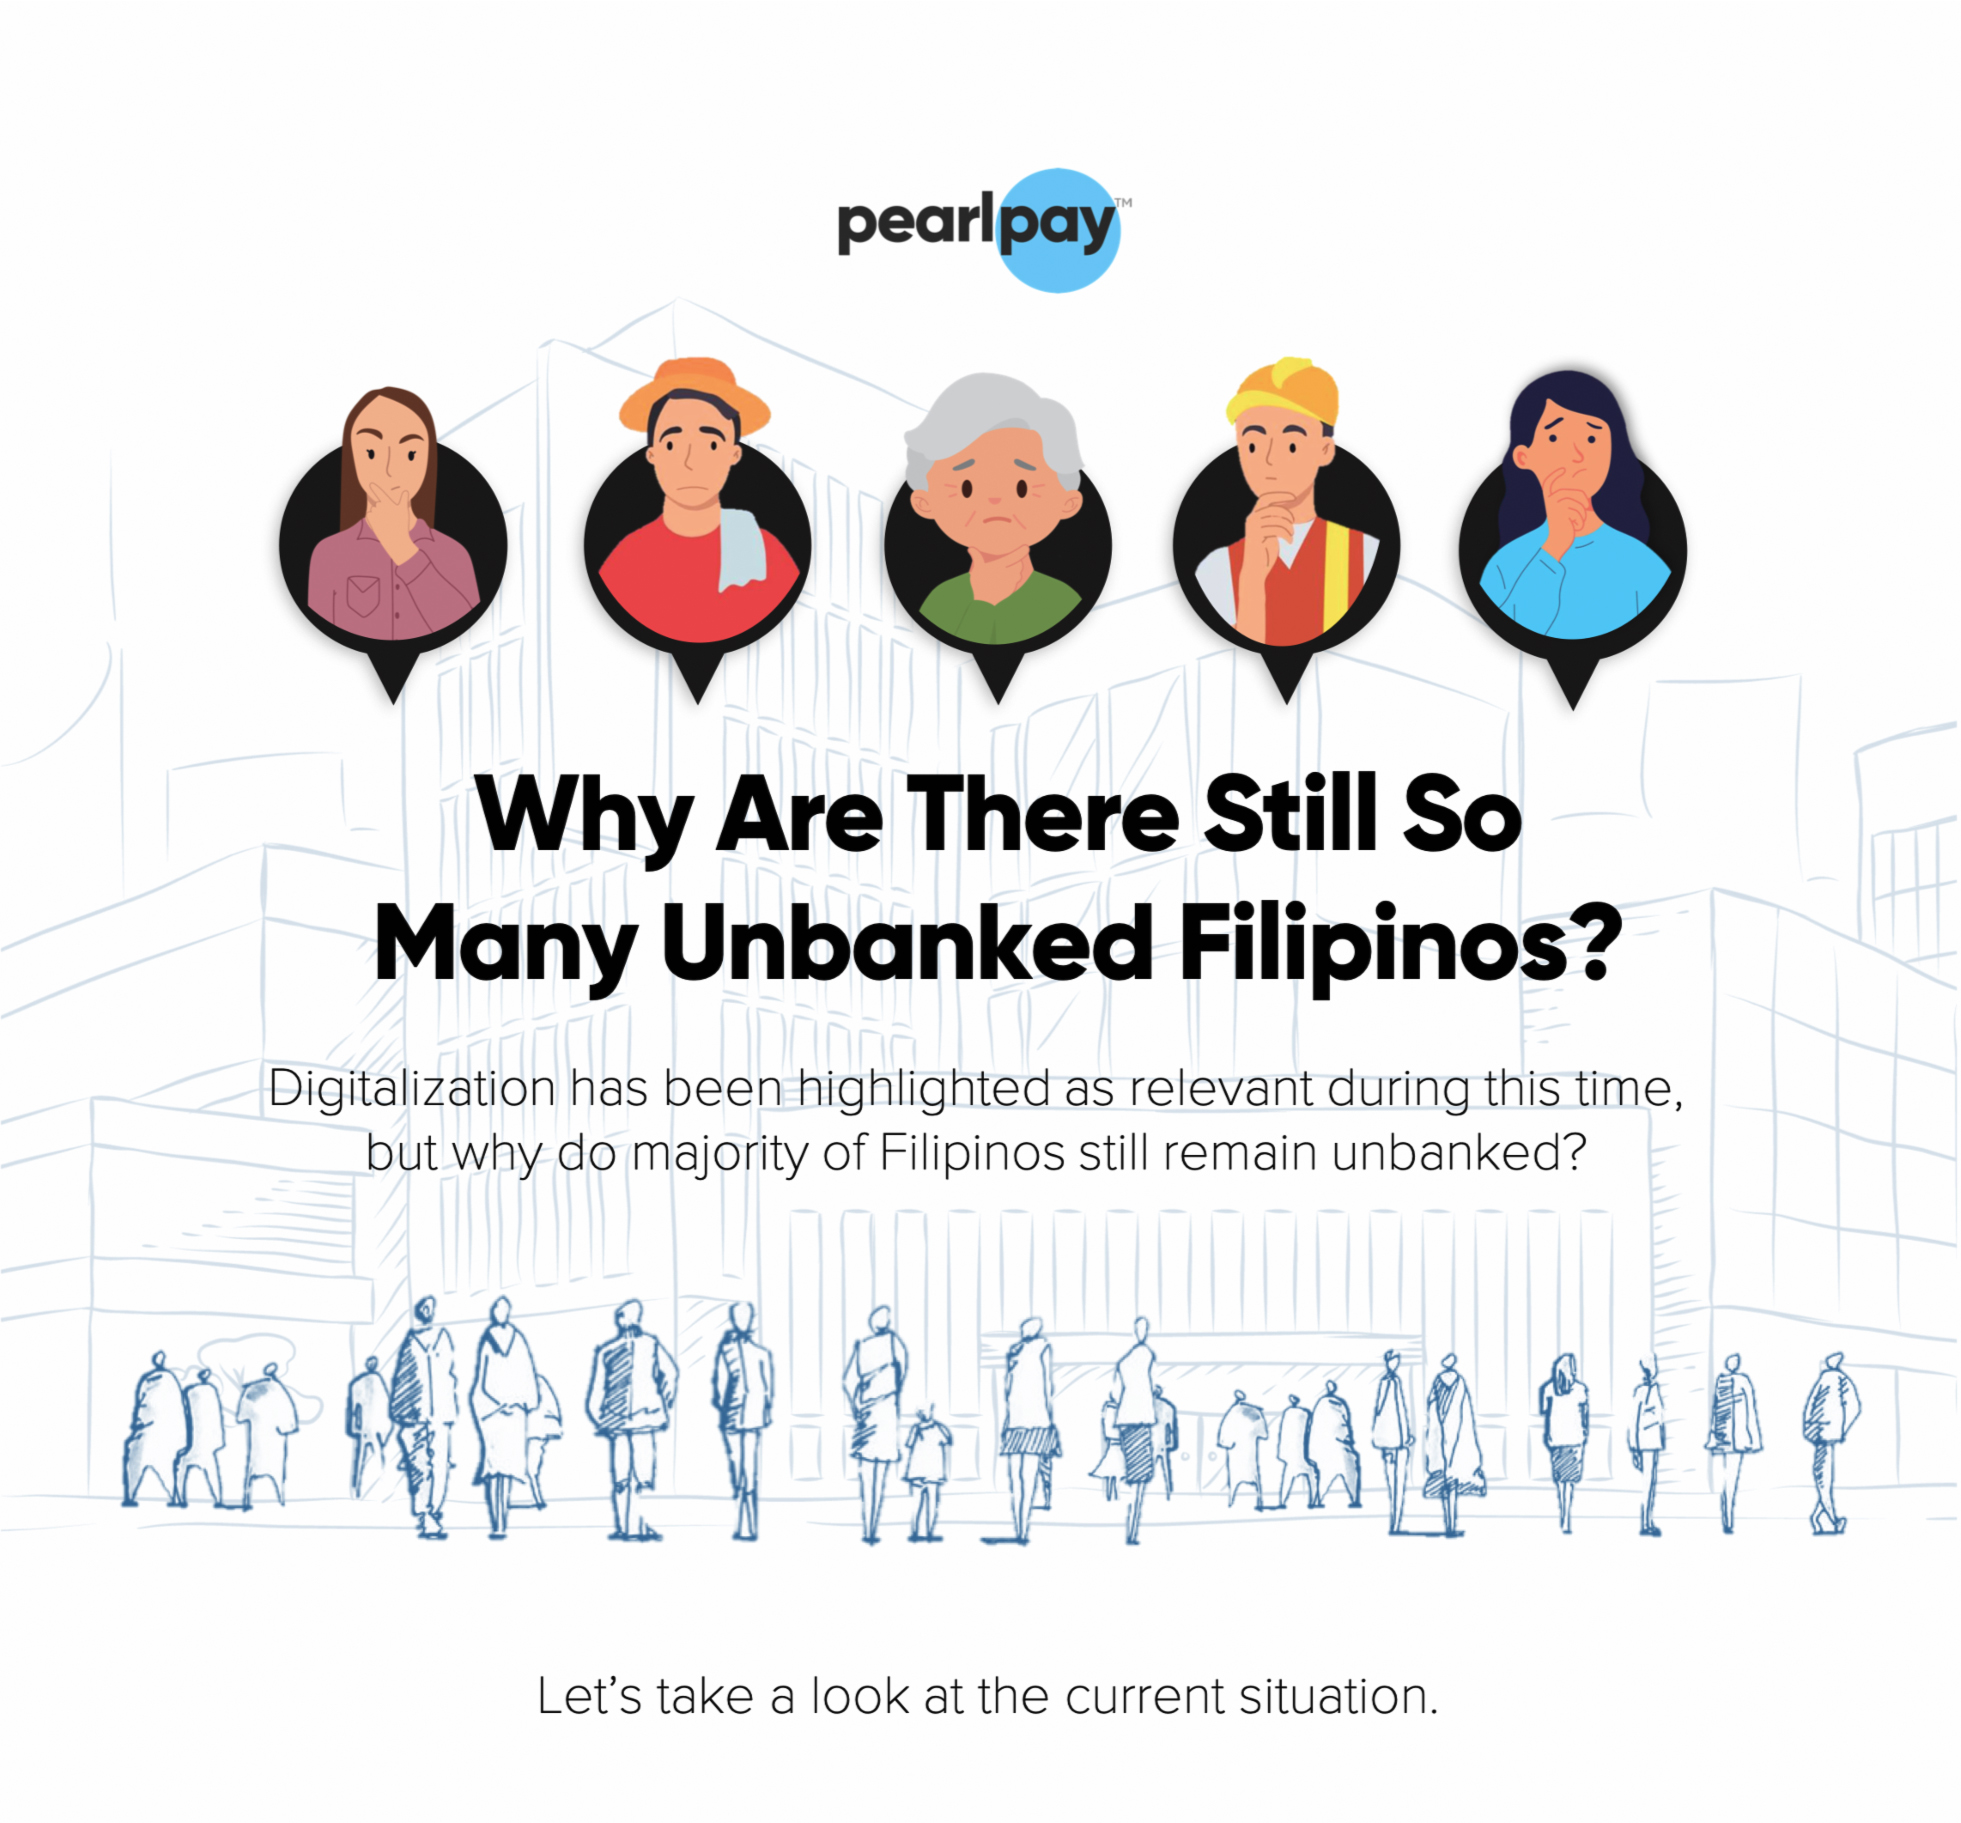 Why are there still so many unbanked Filipinos